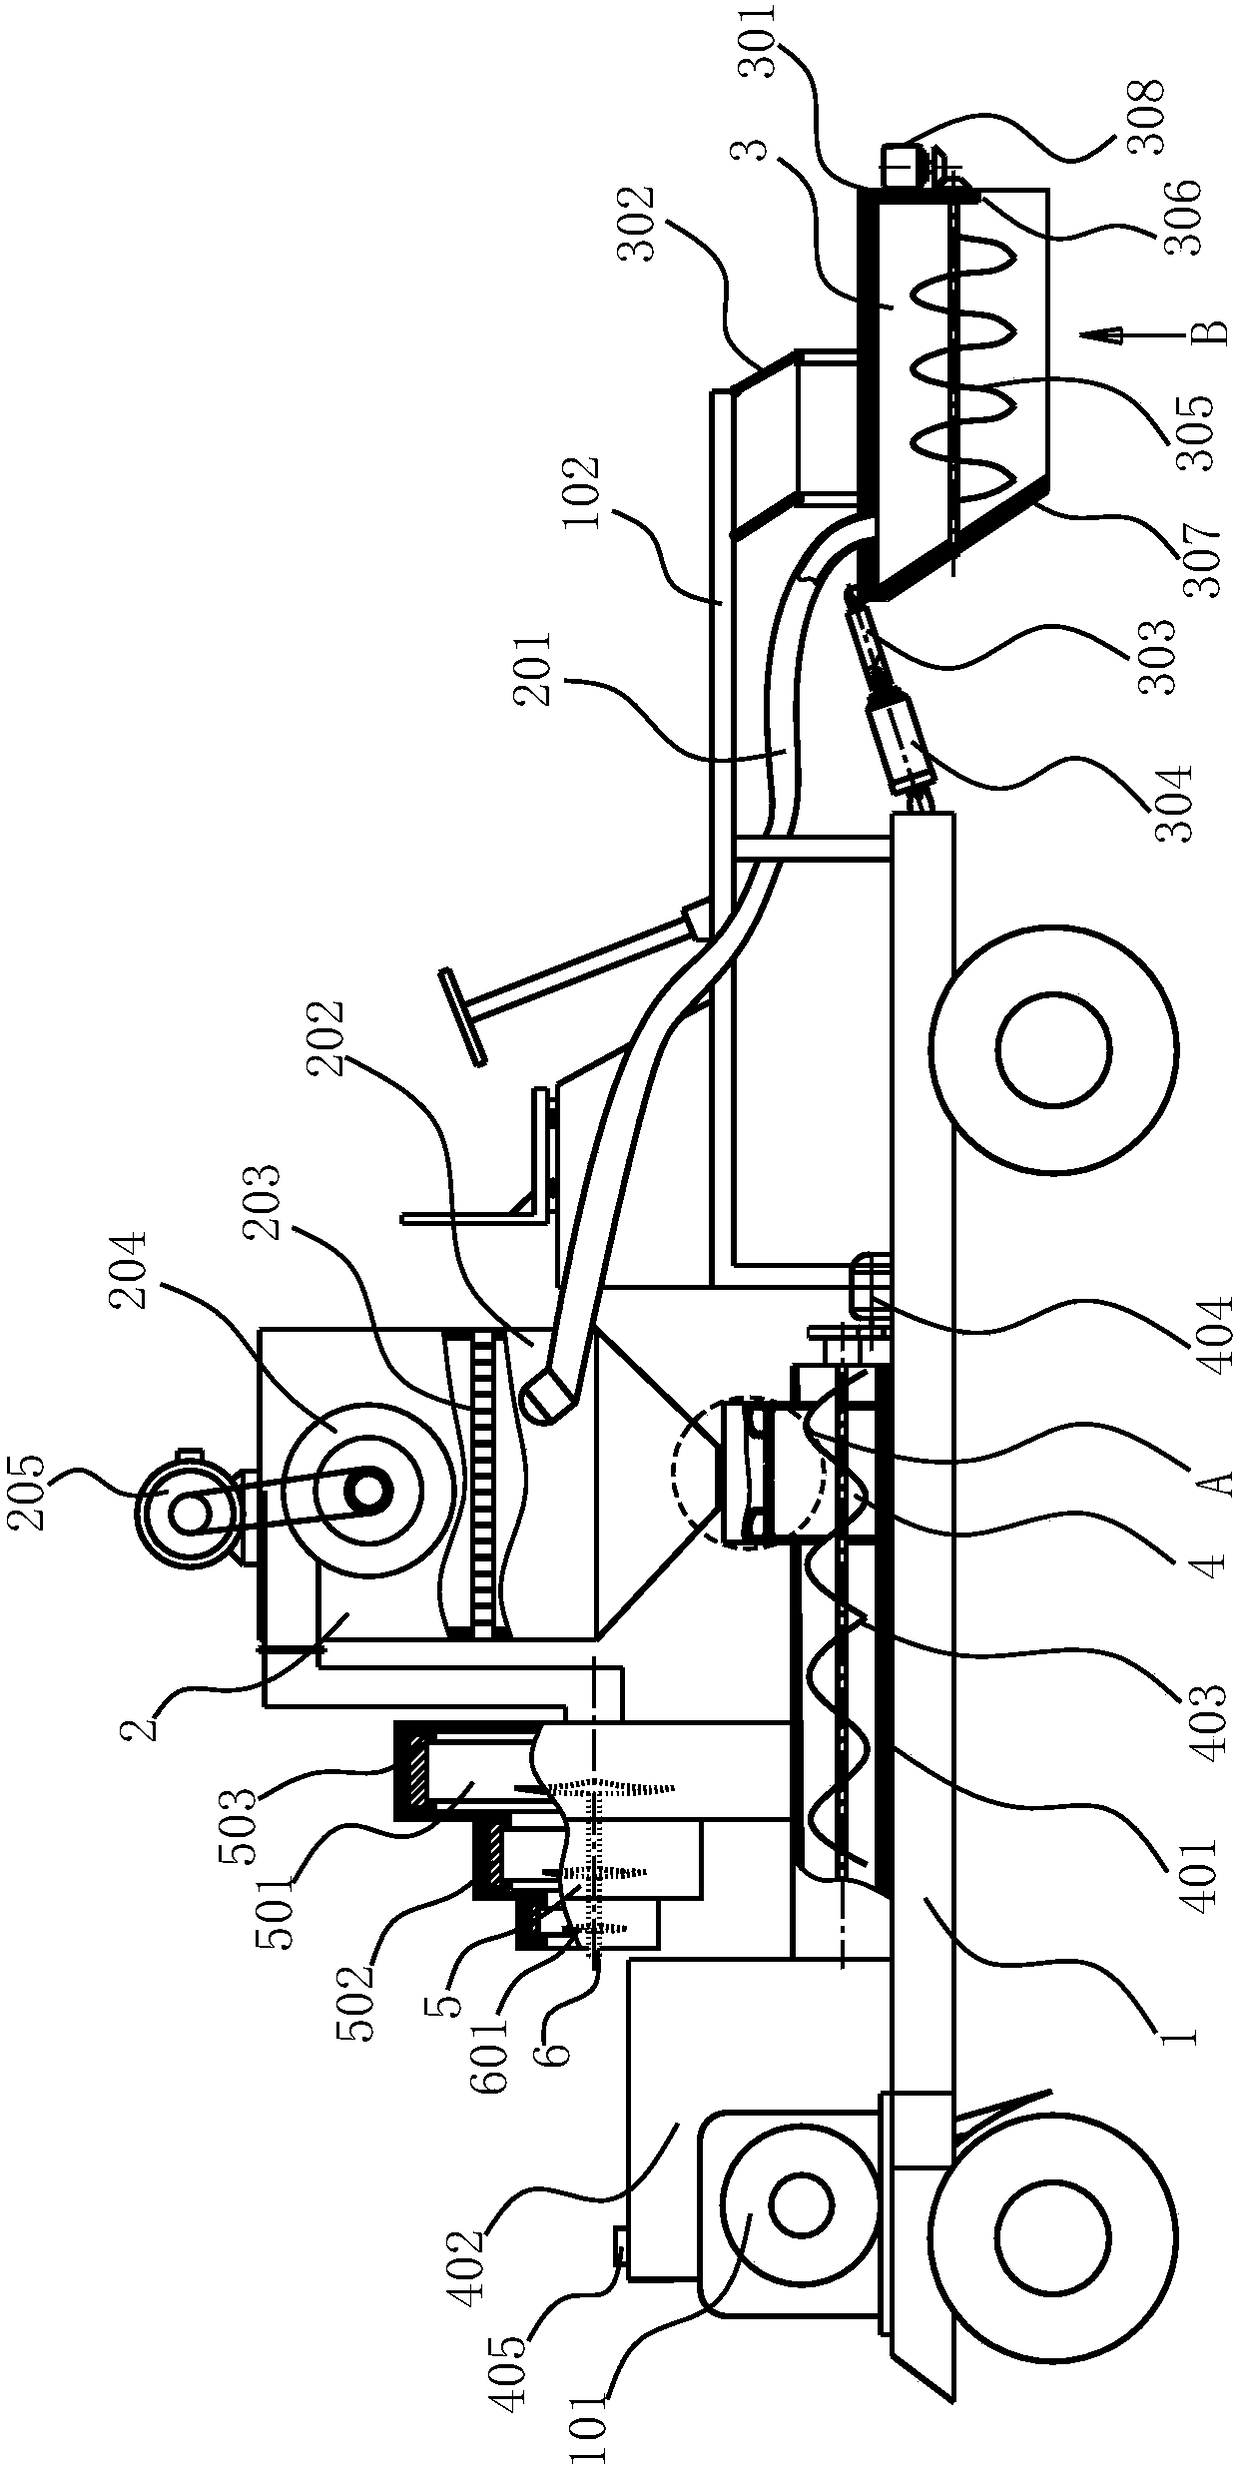 Grain scrabbling device for grain collecting vehicle and method for operating grain scrabbling device